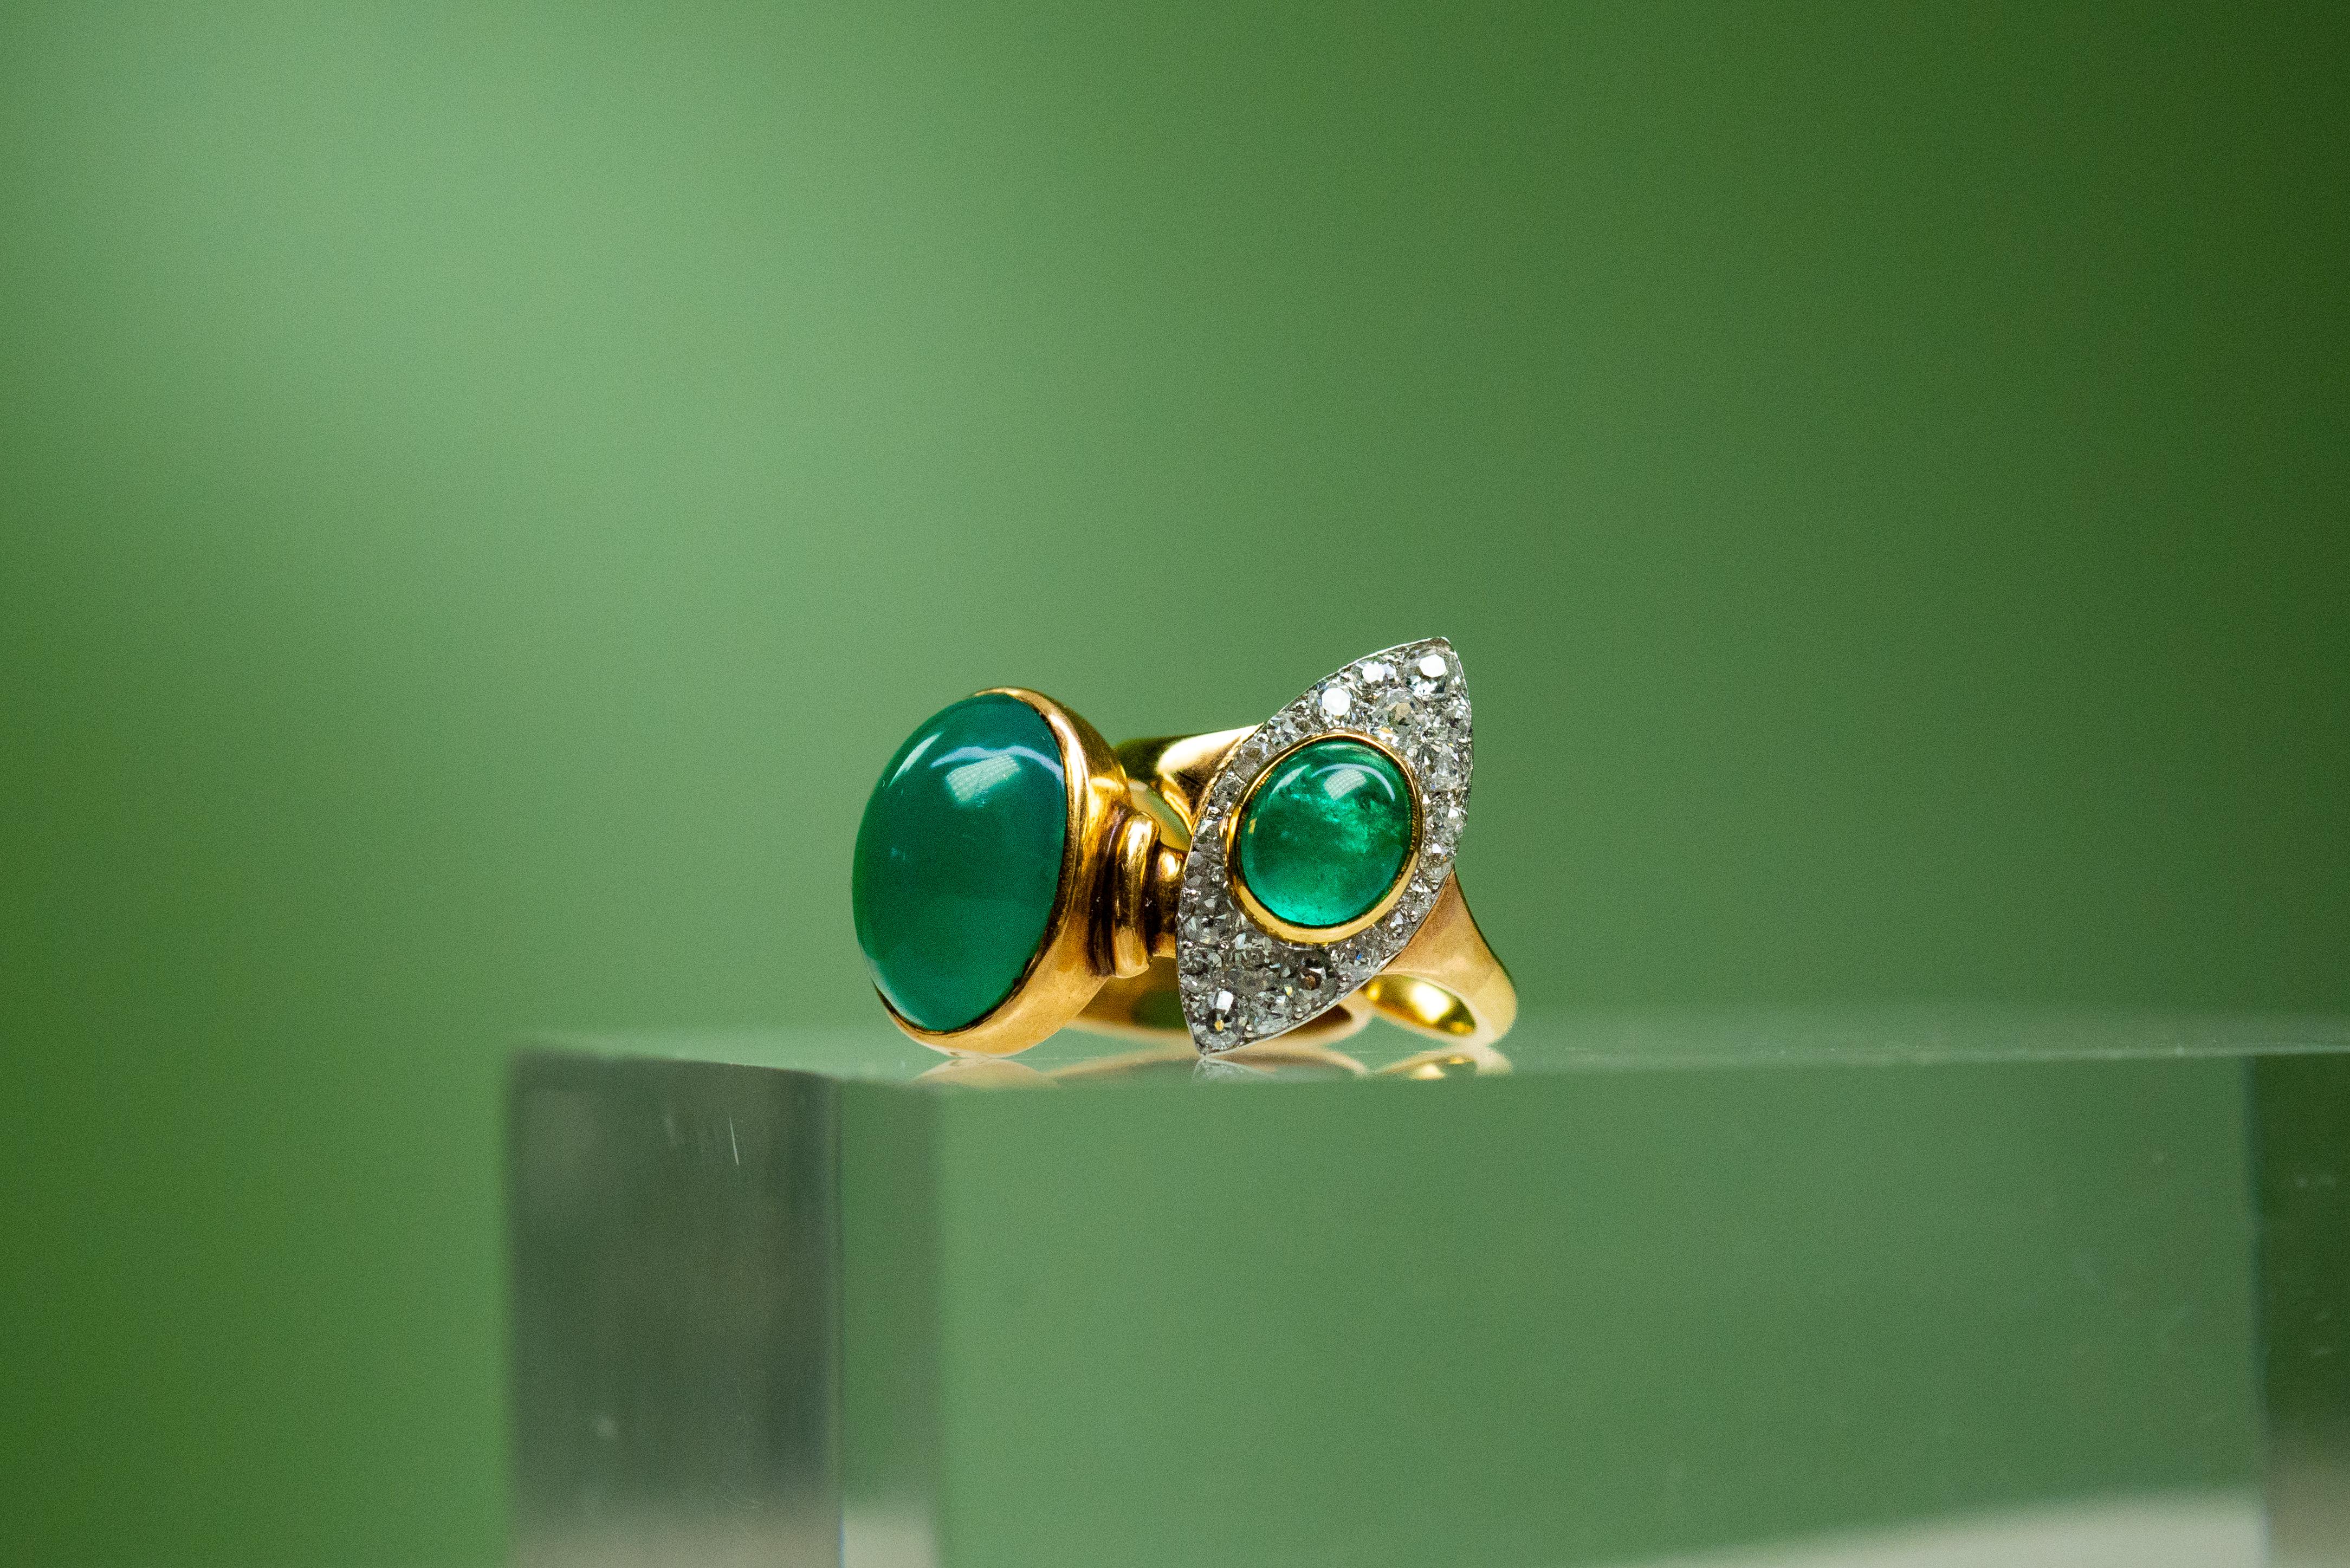 Handmade in our atelier, this vintage-style ring is truly special. The unique pale green emerald cabochon at its centre is a timeless oval shape and weighs in at 1.17 carats. Around its edges is a sparkling cluster of white diamonds in round old cut